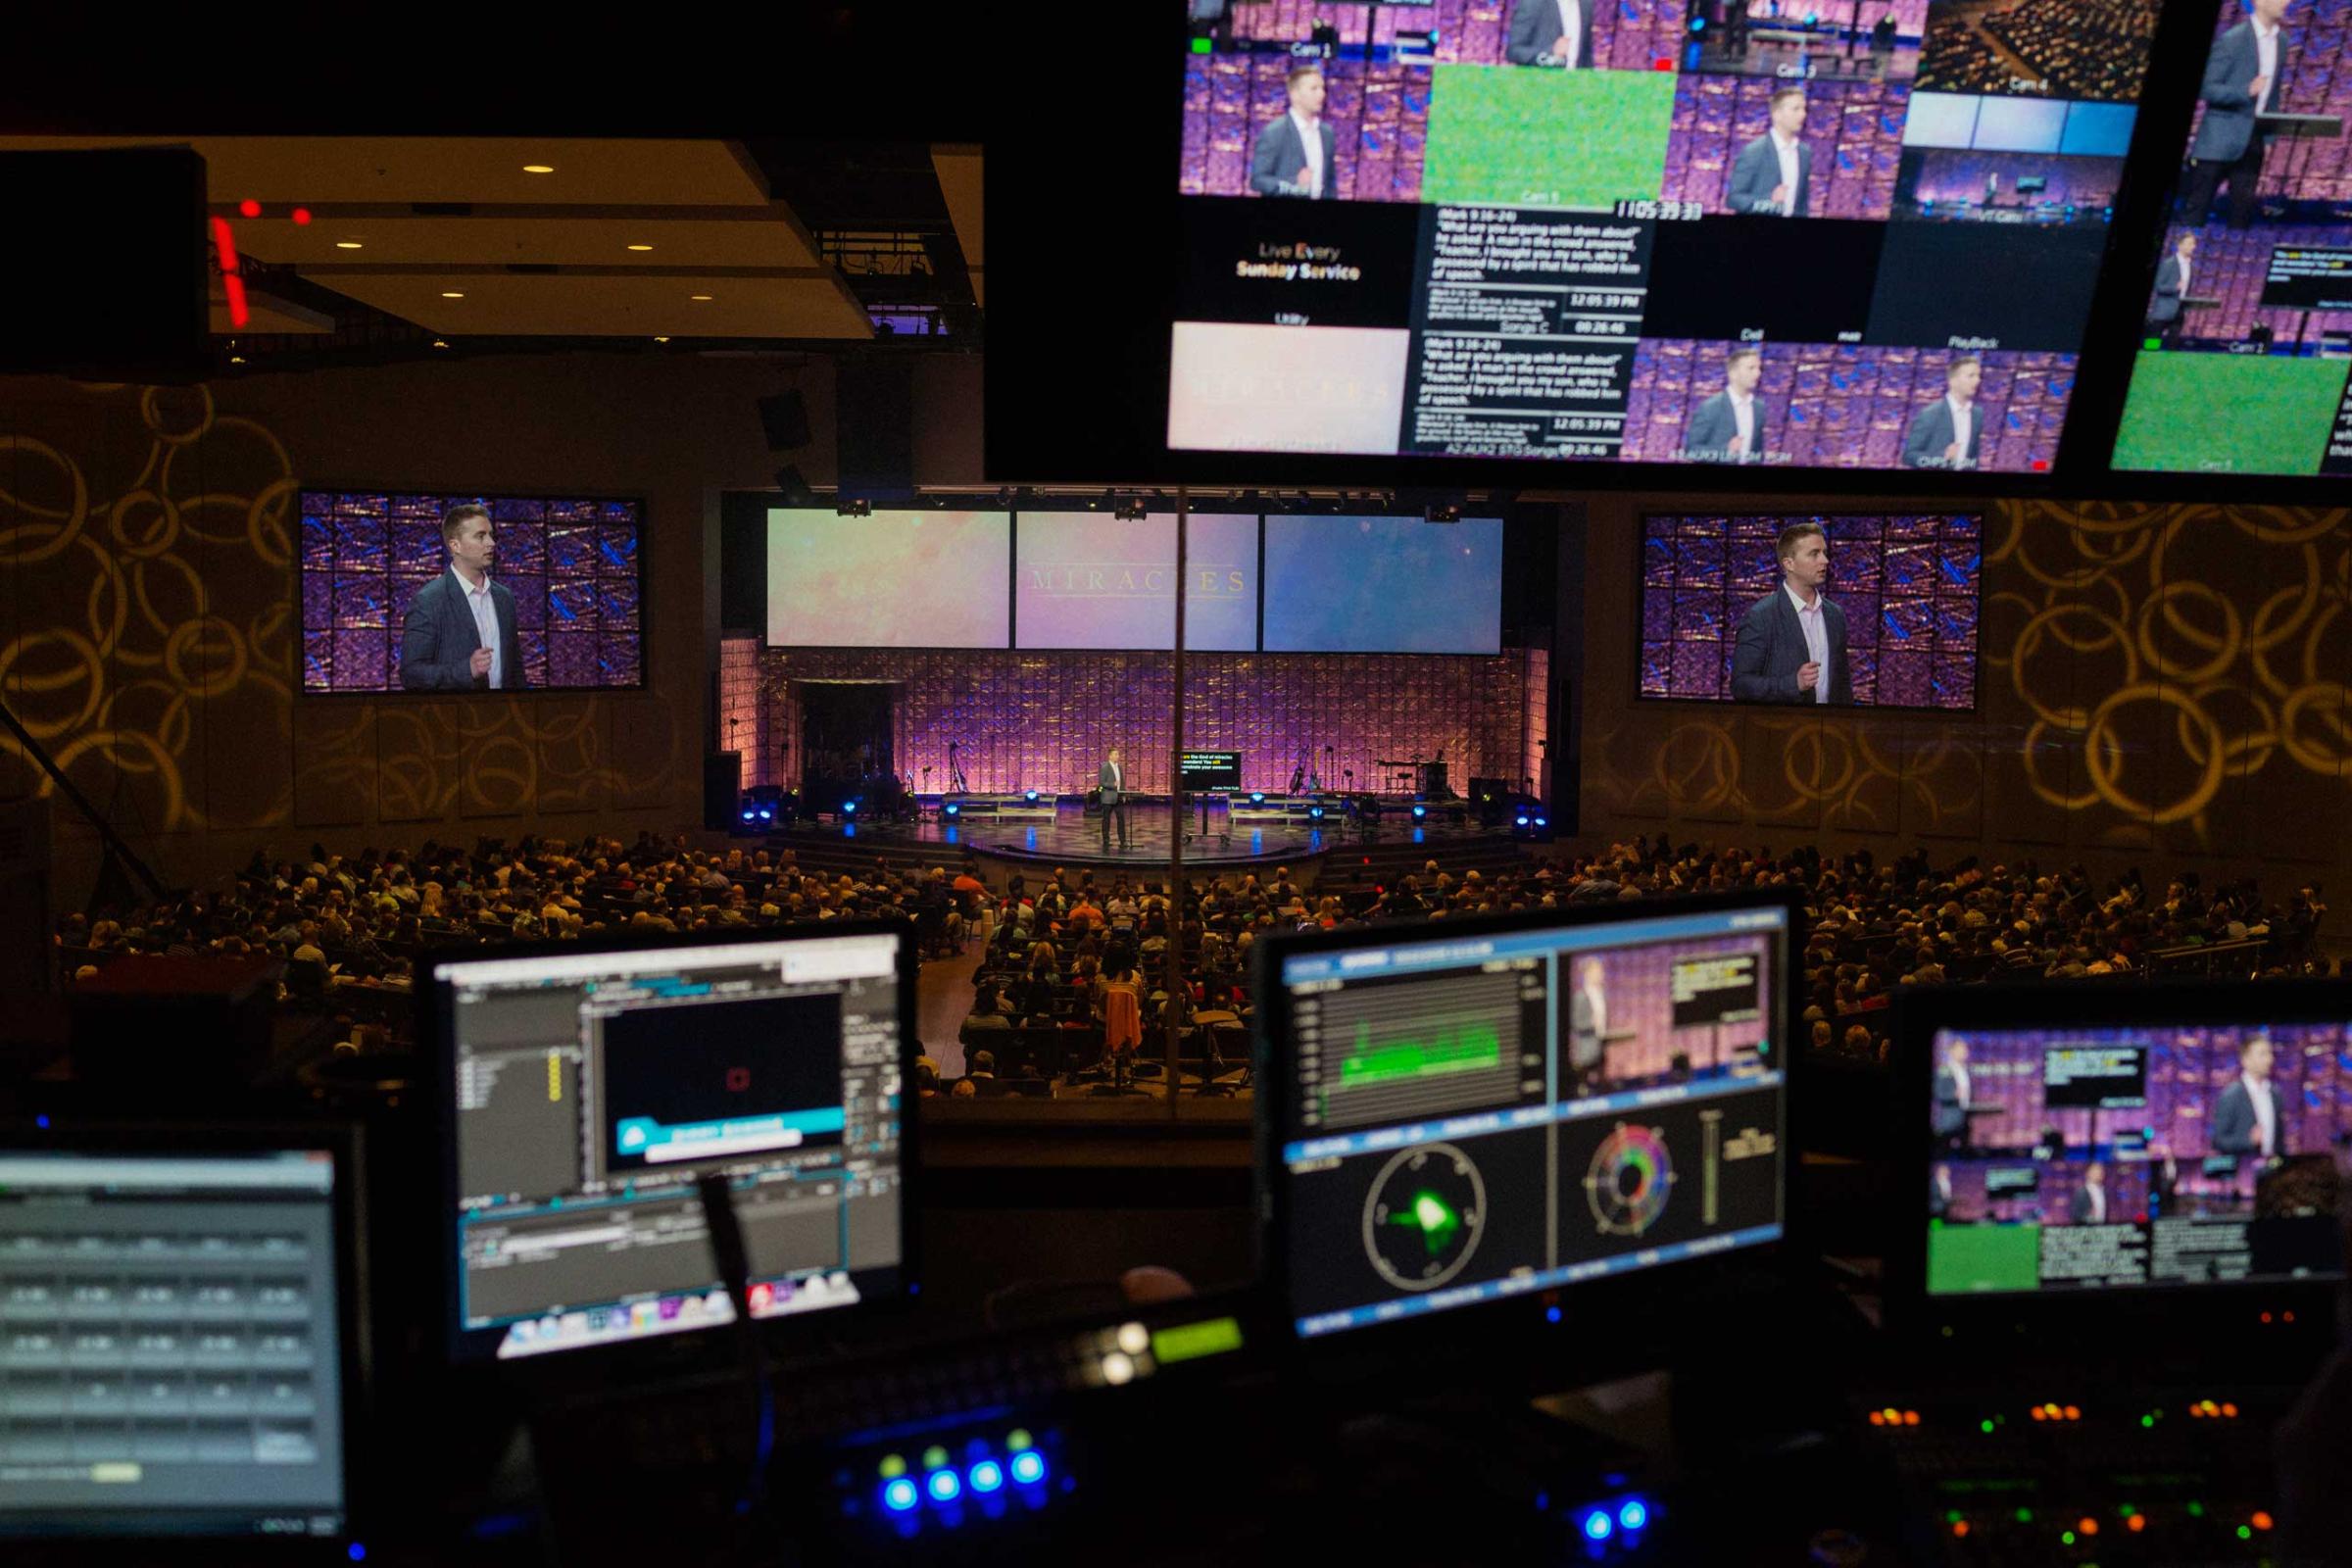 The view from the sound booth as Associate Pastor Jimmy Bowers delivers a message at Church of the Highlands in Birmingham, Ala. on March 22, 2015.